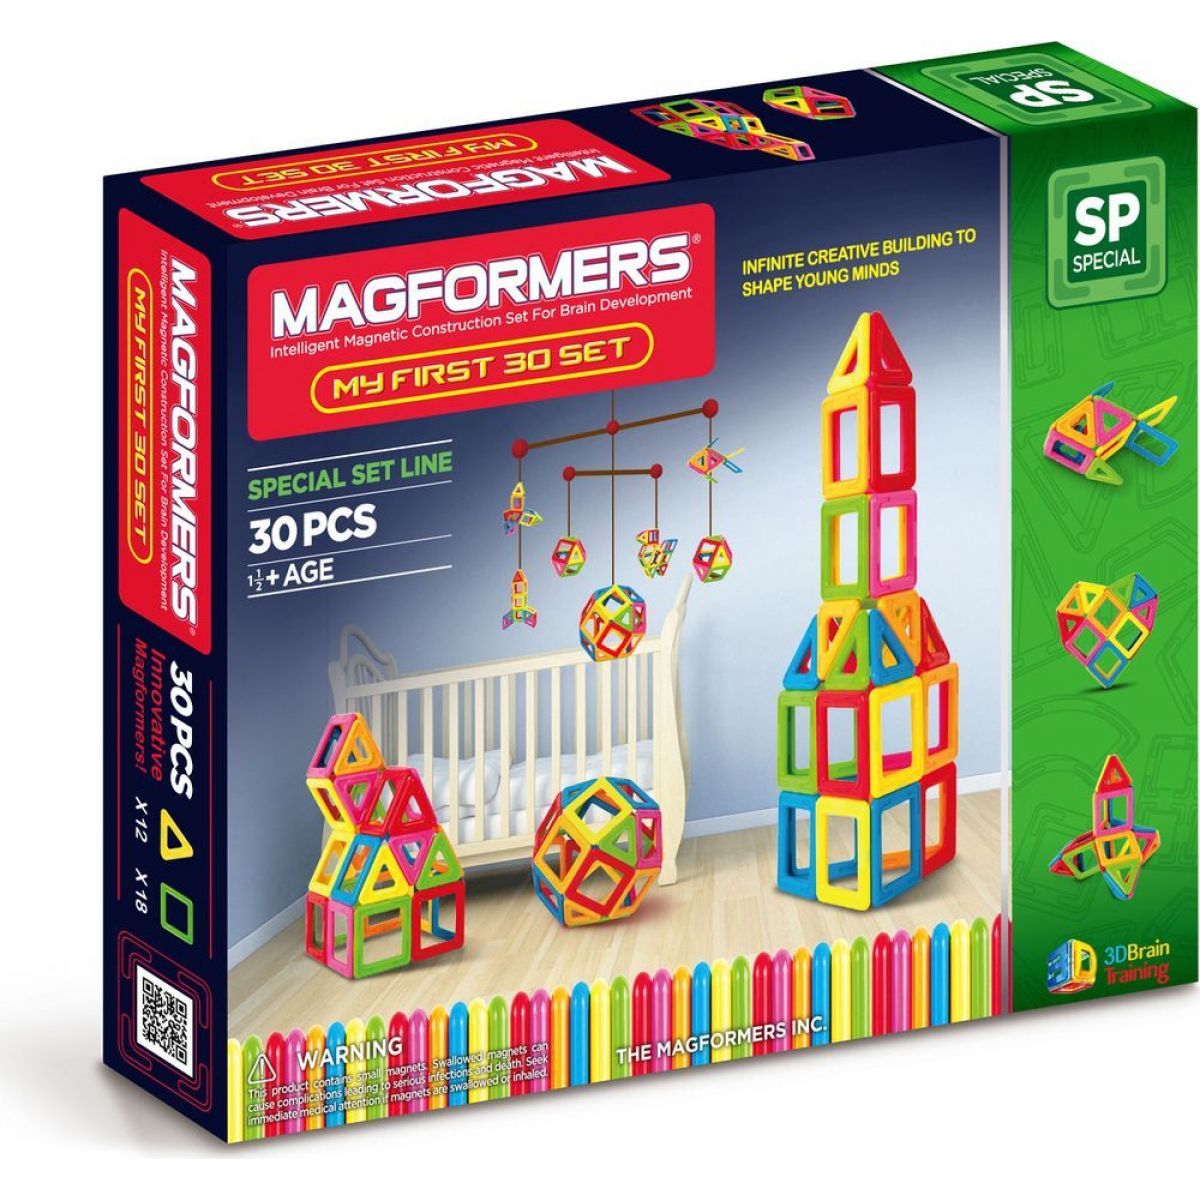 Magformers My first set 54 ks